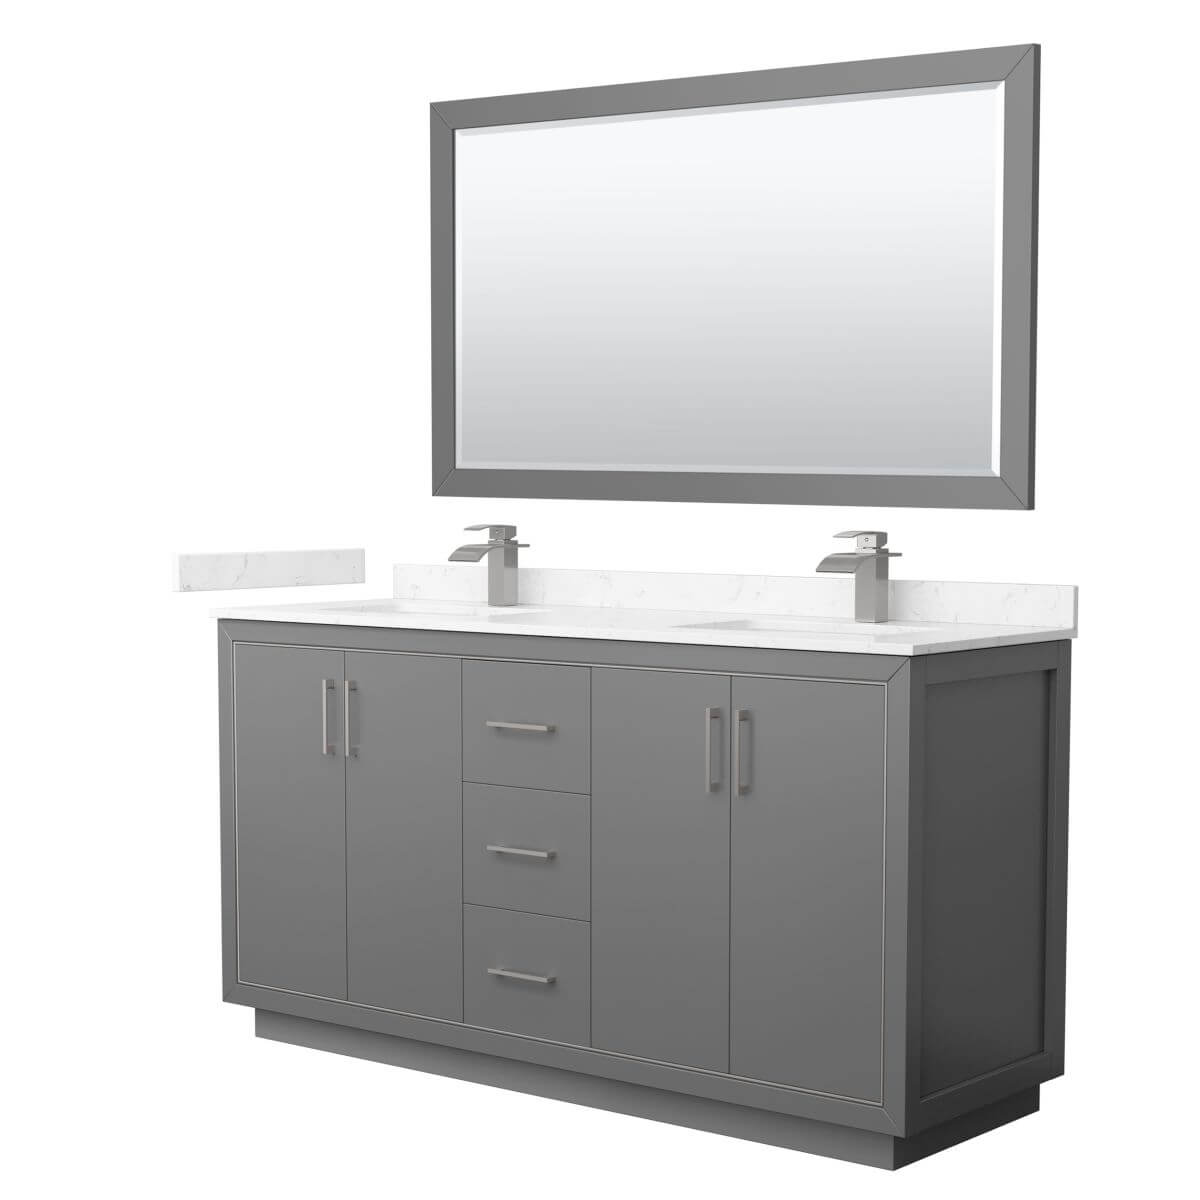 Wyndham Collection WCF111166DKGC2UNSM58 Icon 66 inch Double Bathroom Vanity in Dark Gray with Carrara Cultured Marble Countertop, Undermount Square Sinks, Brushed Nickel Trim and 58 Inch Mirror